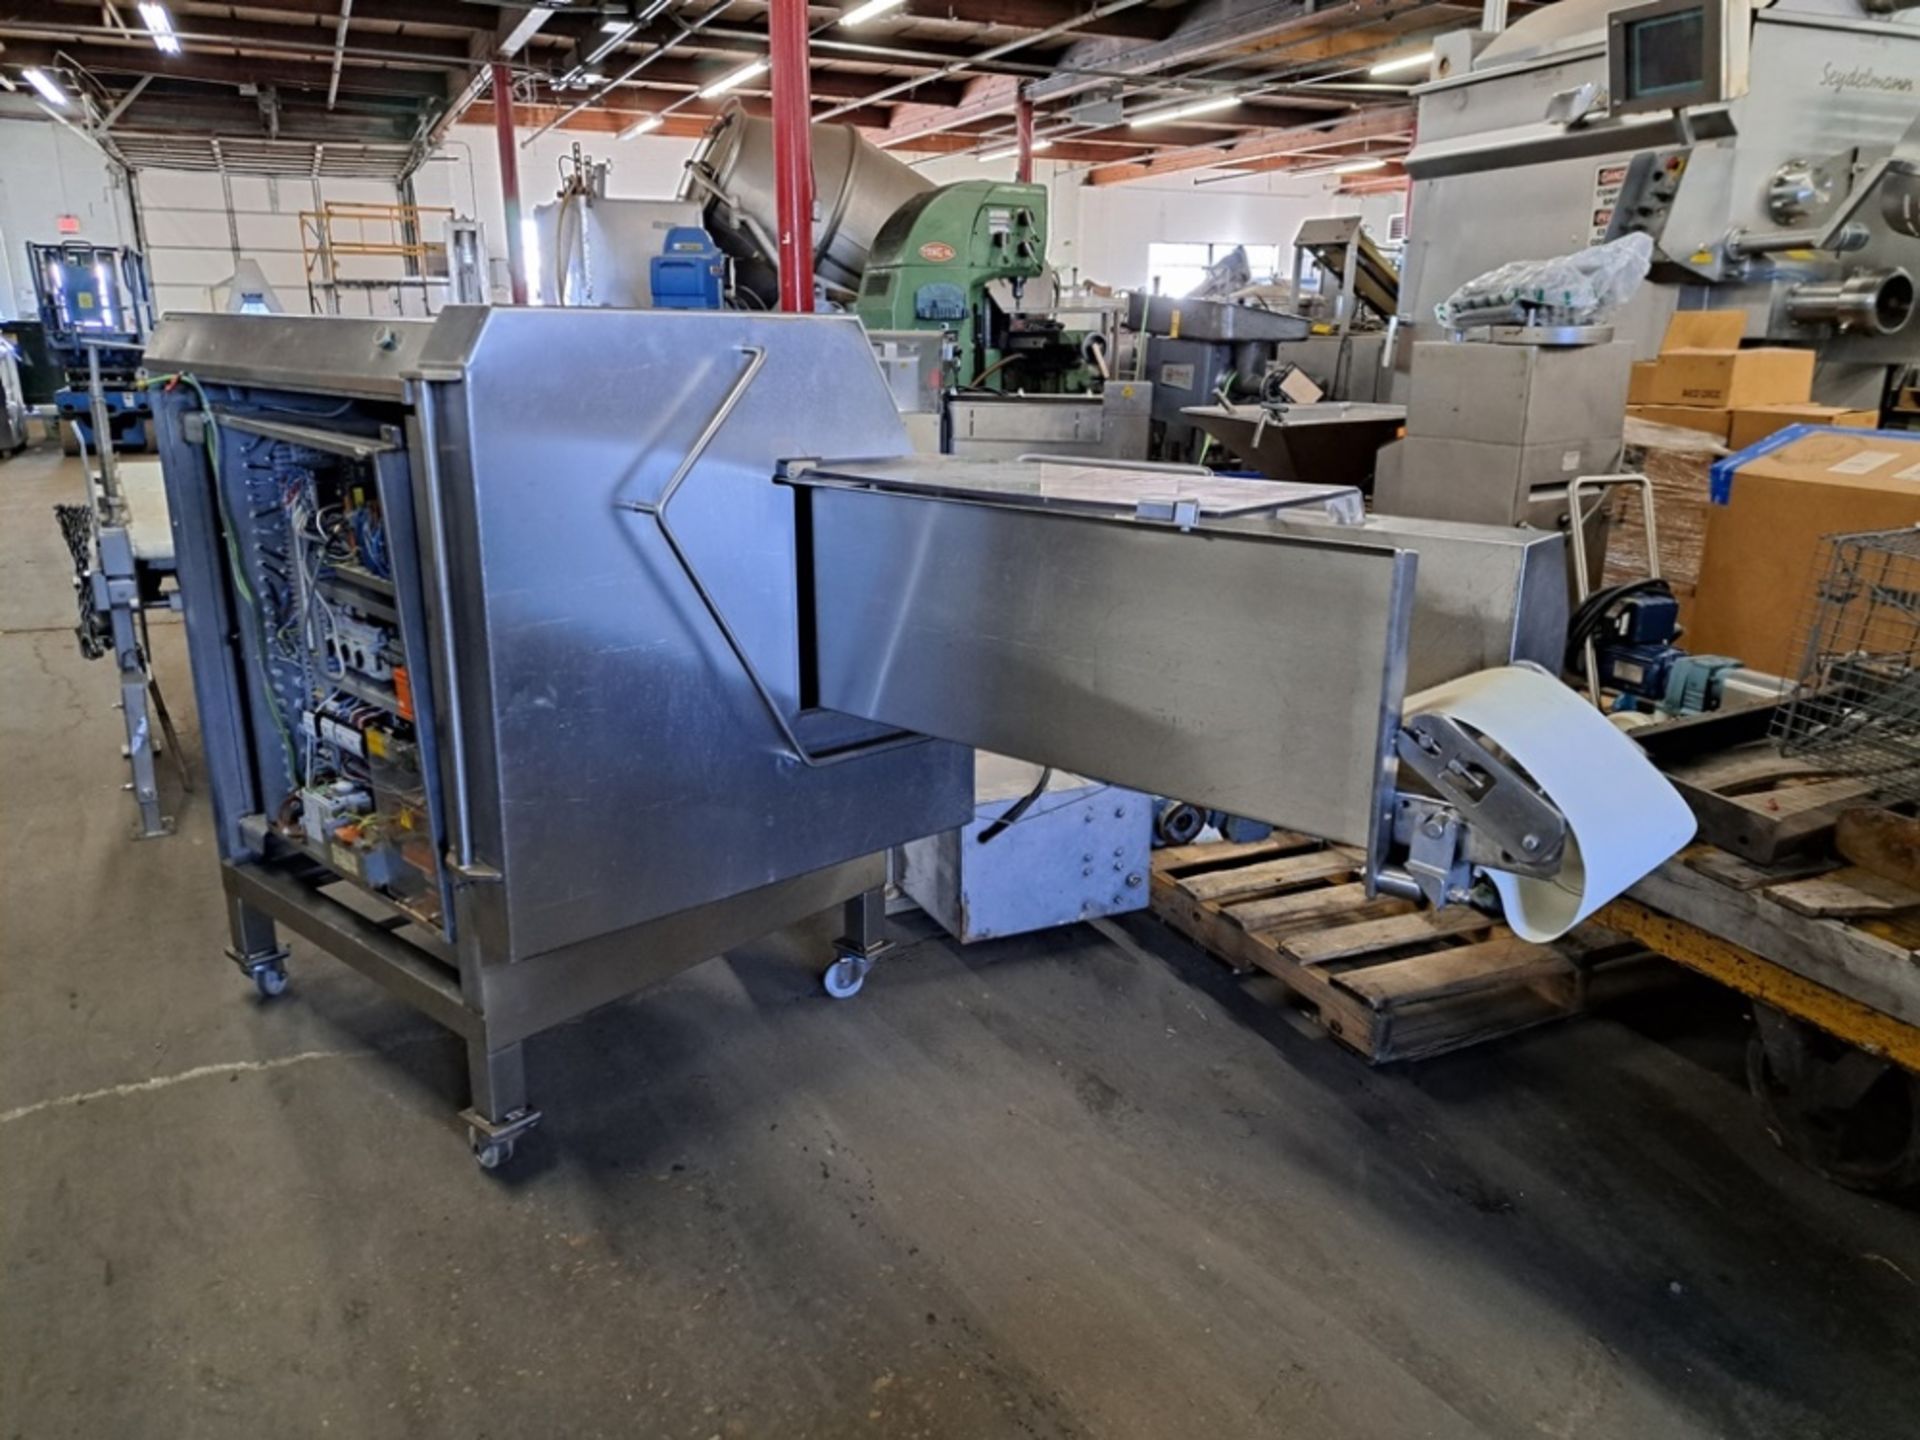 Holac Mdl. 23/74 Sectronic Portion Cutting Machine (Located in Sandwich, IL) - Image 2 of 8